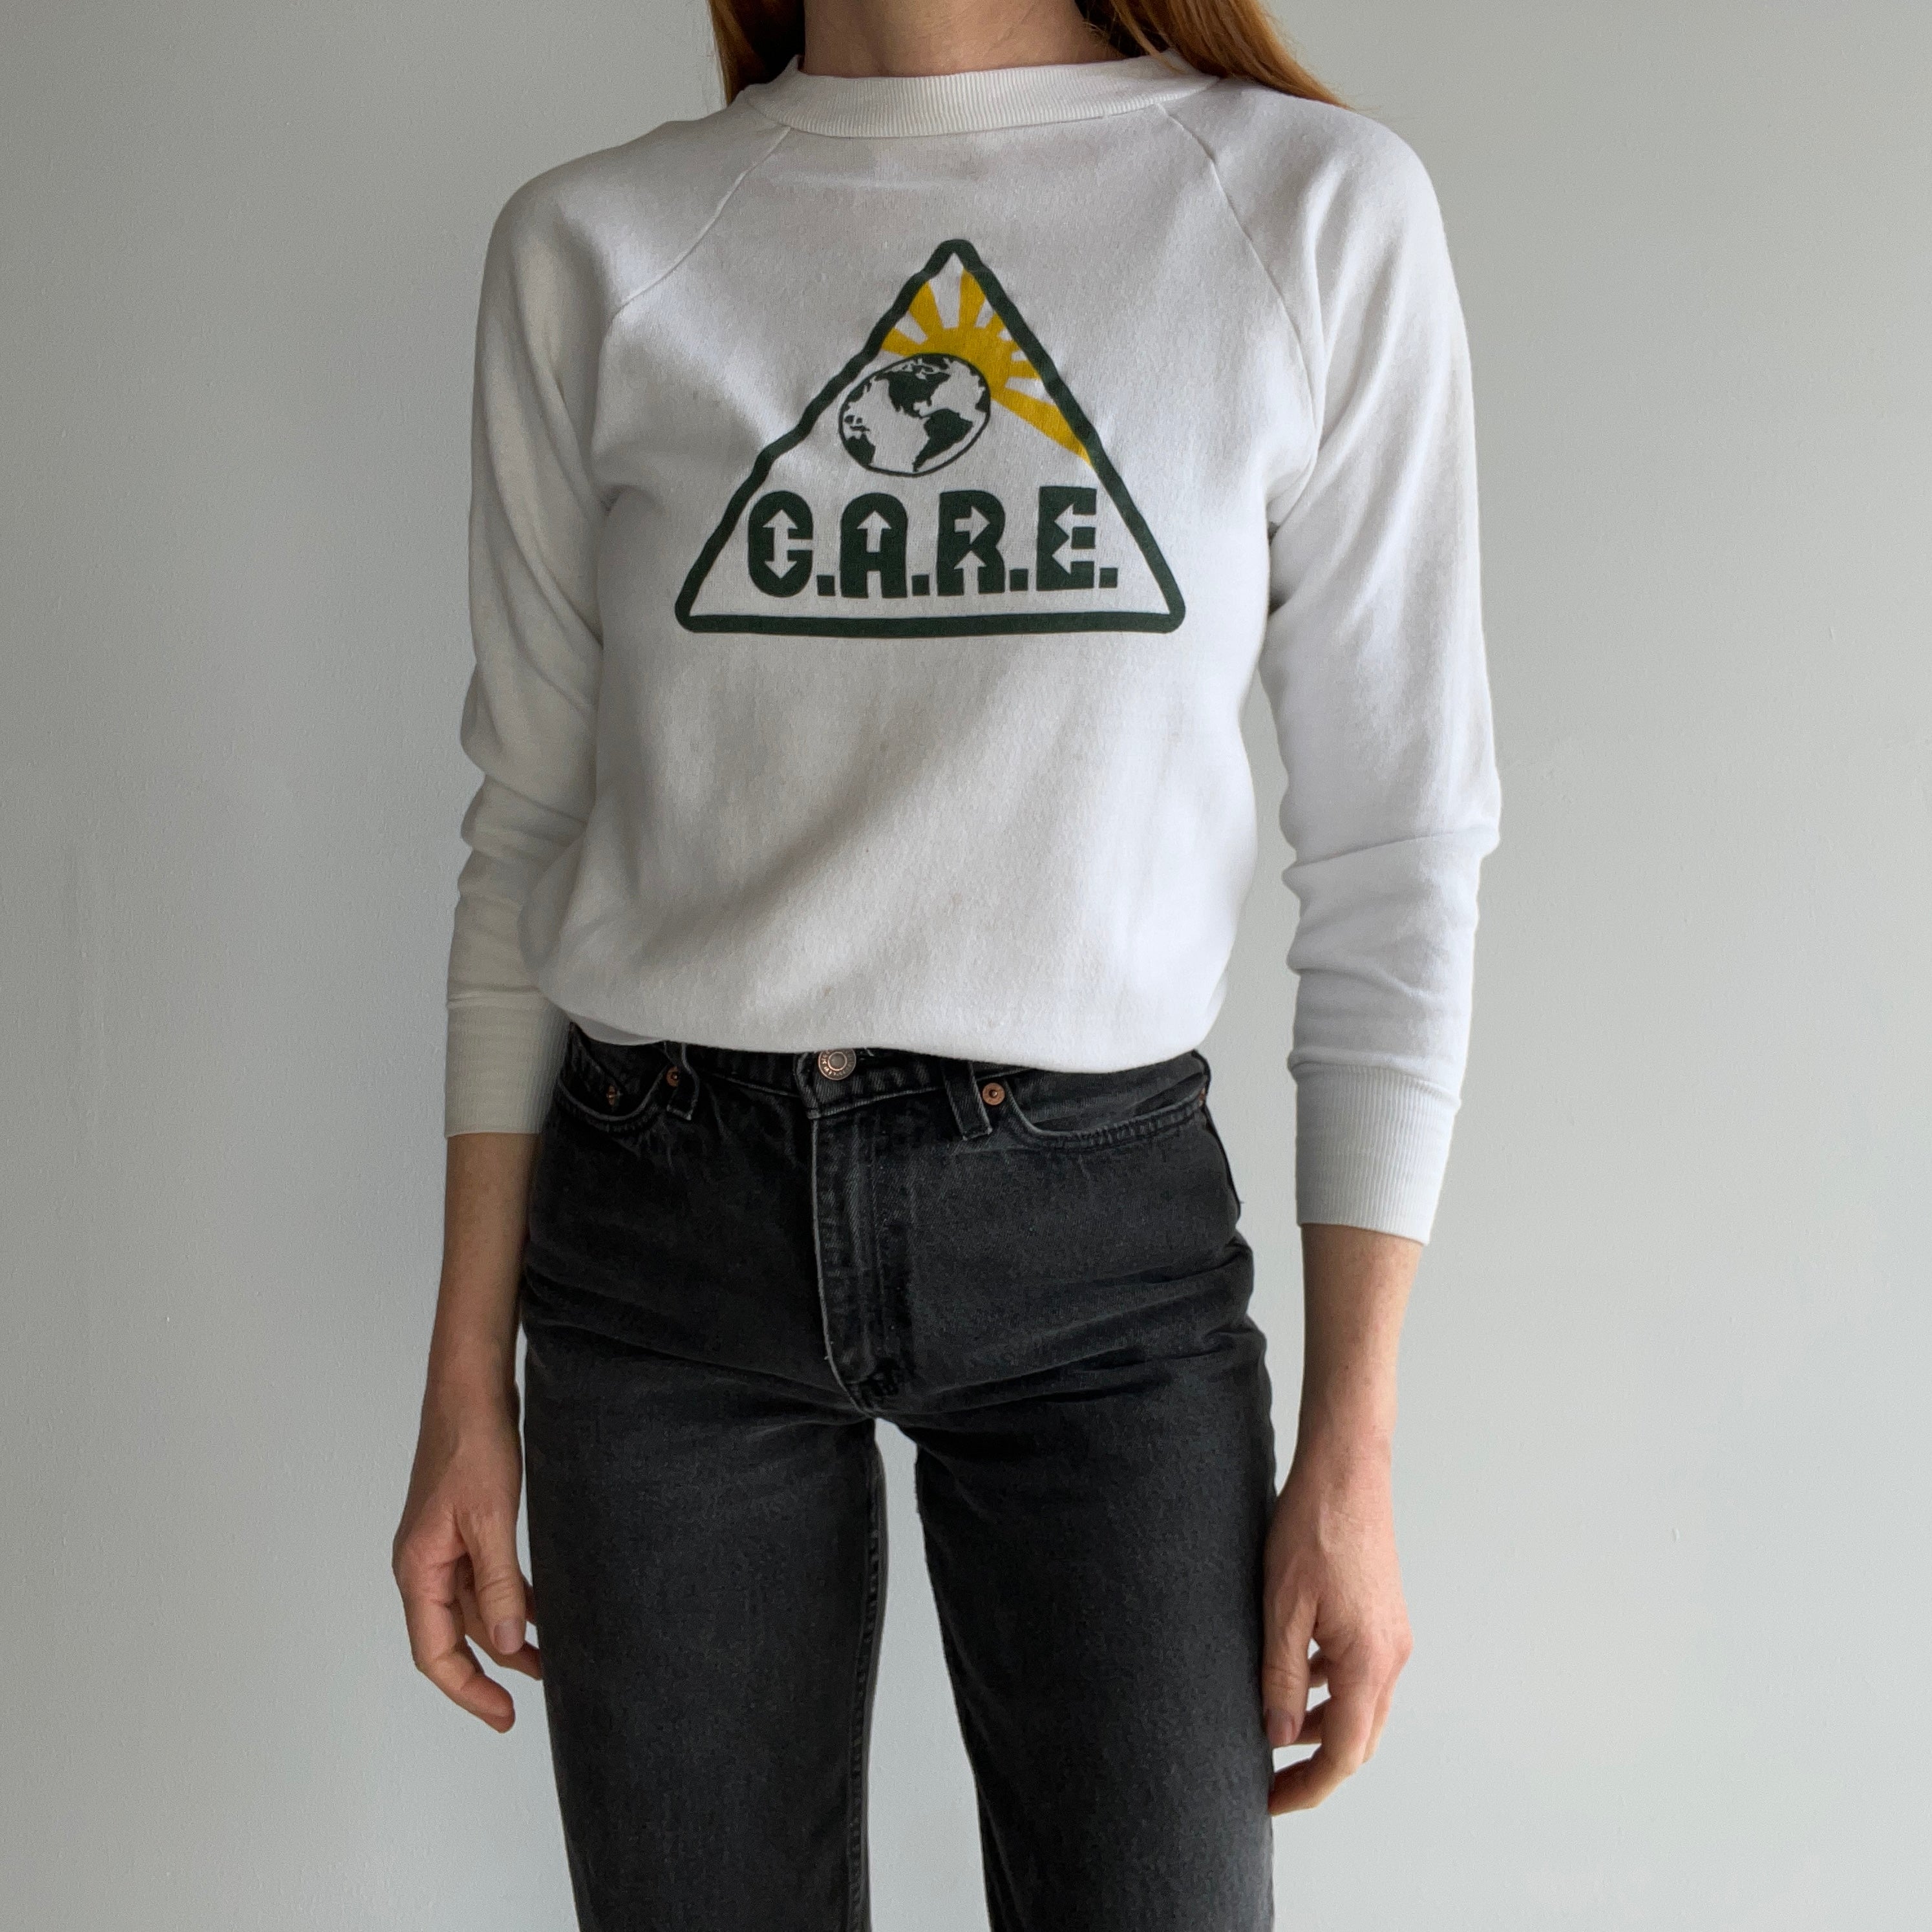 1980s C.A.R.E. Nicely Stained Sweatshirt by Healthknit